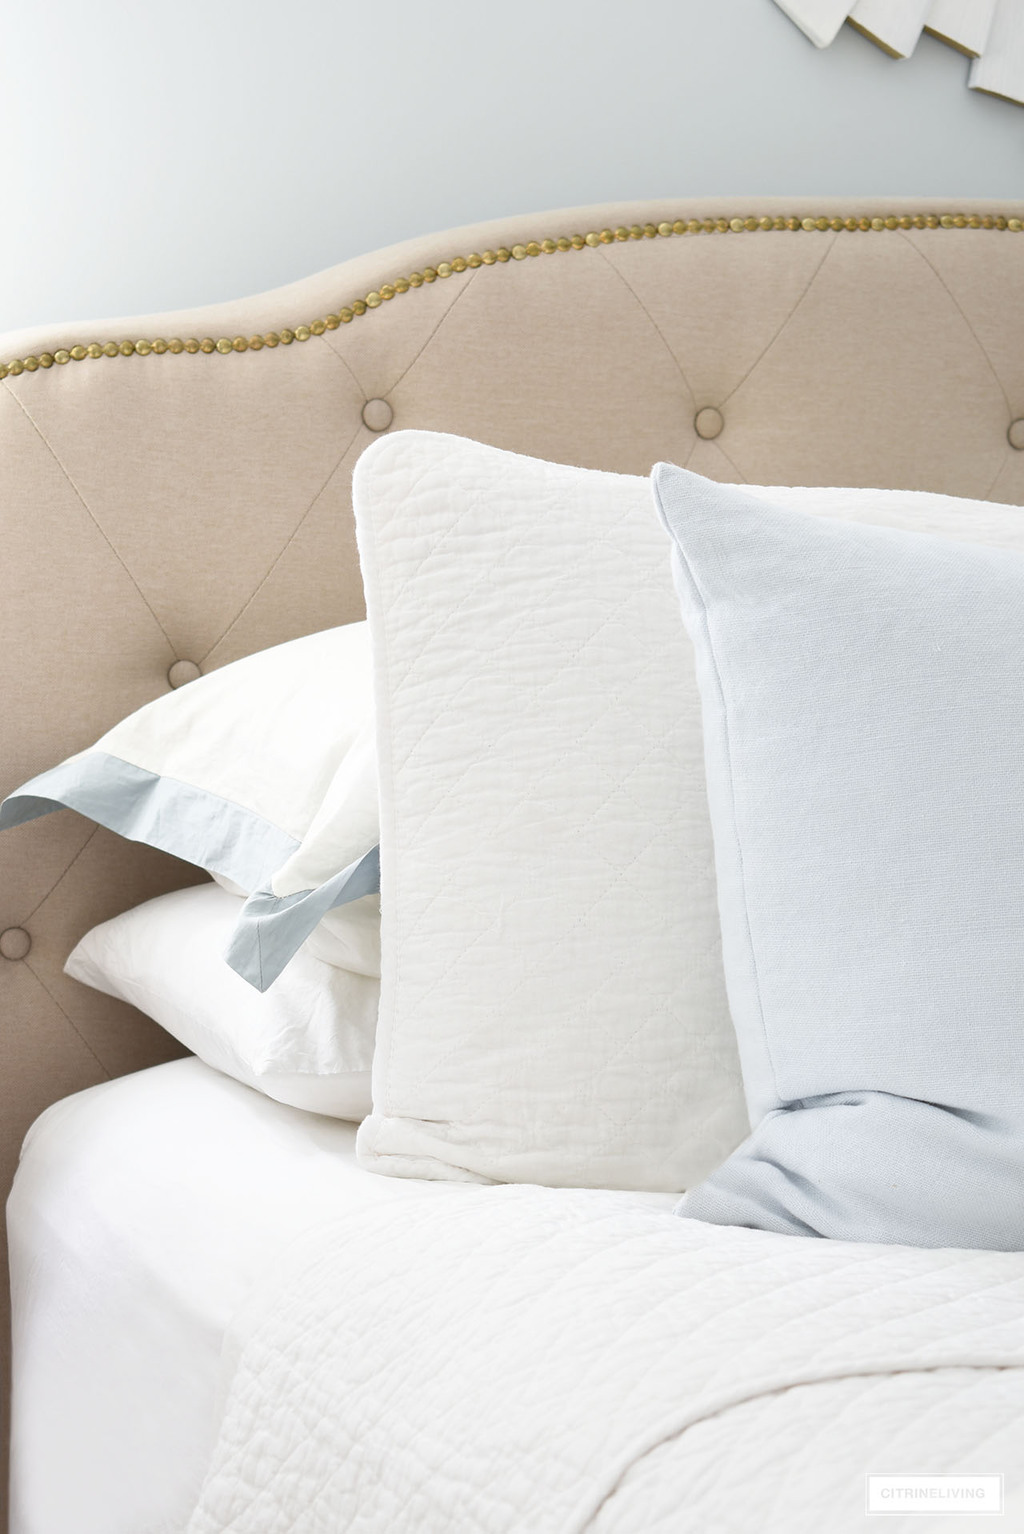 Layers of quilted bedding, white sheets and light blue throw pillows.